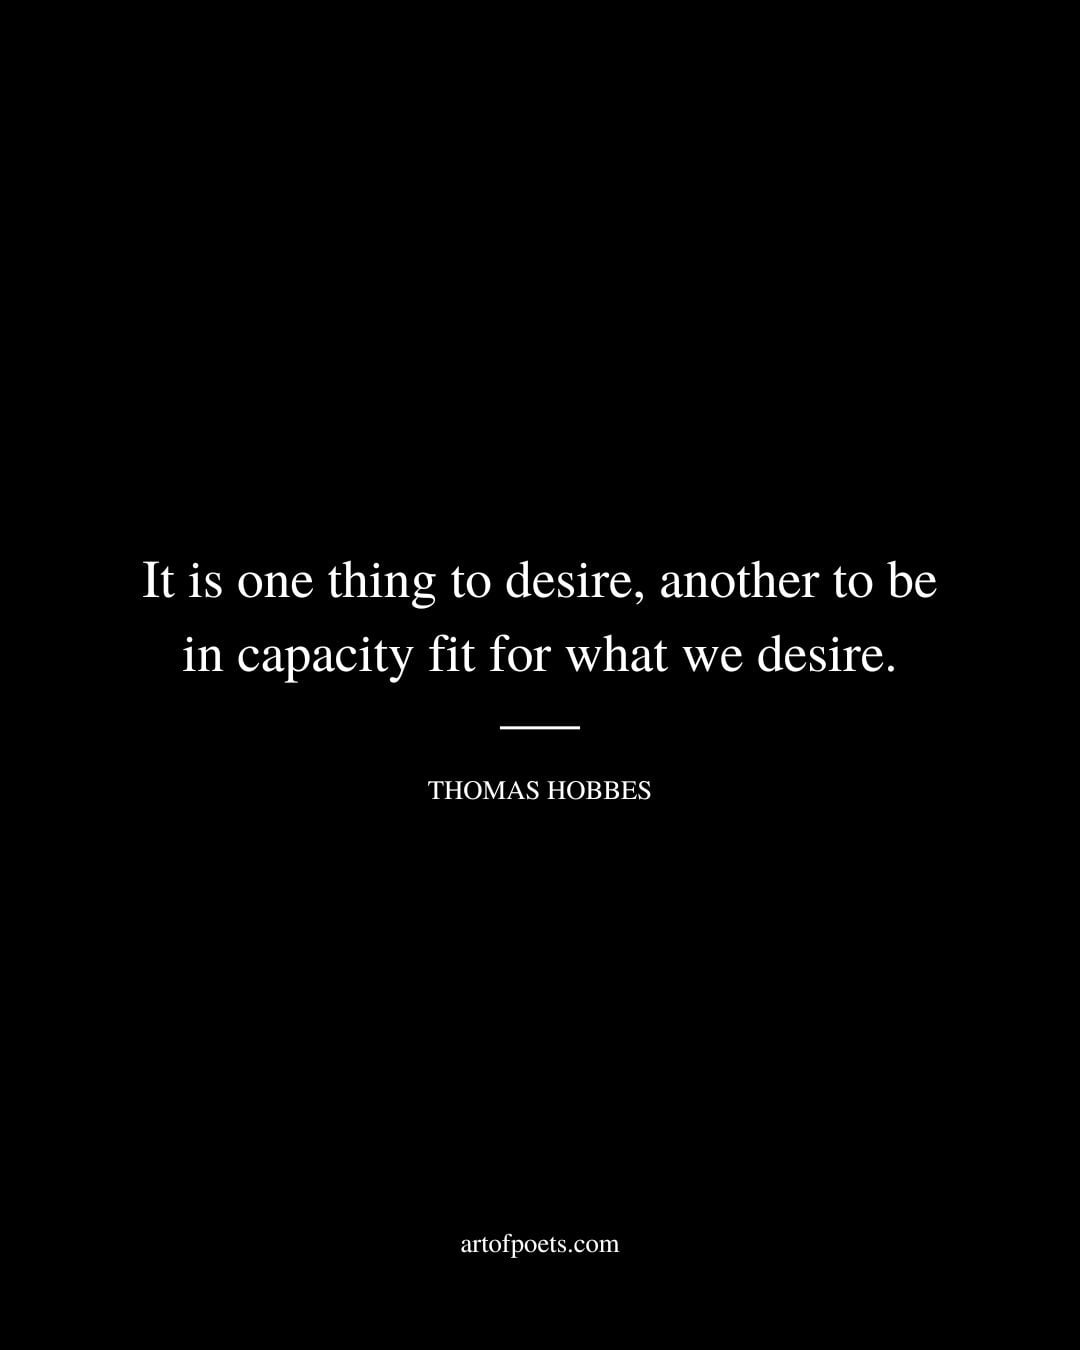 It is one thing to desire another to be in capacity fit for what we desire